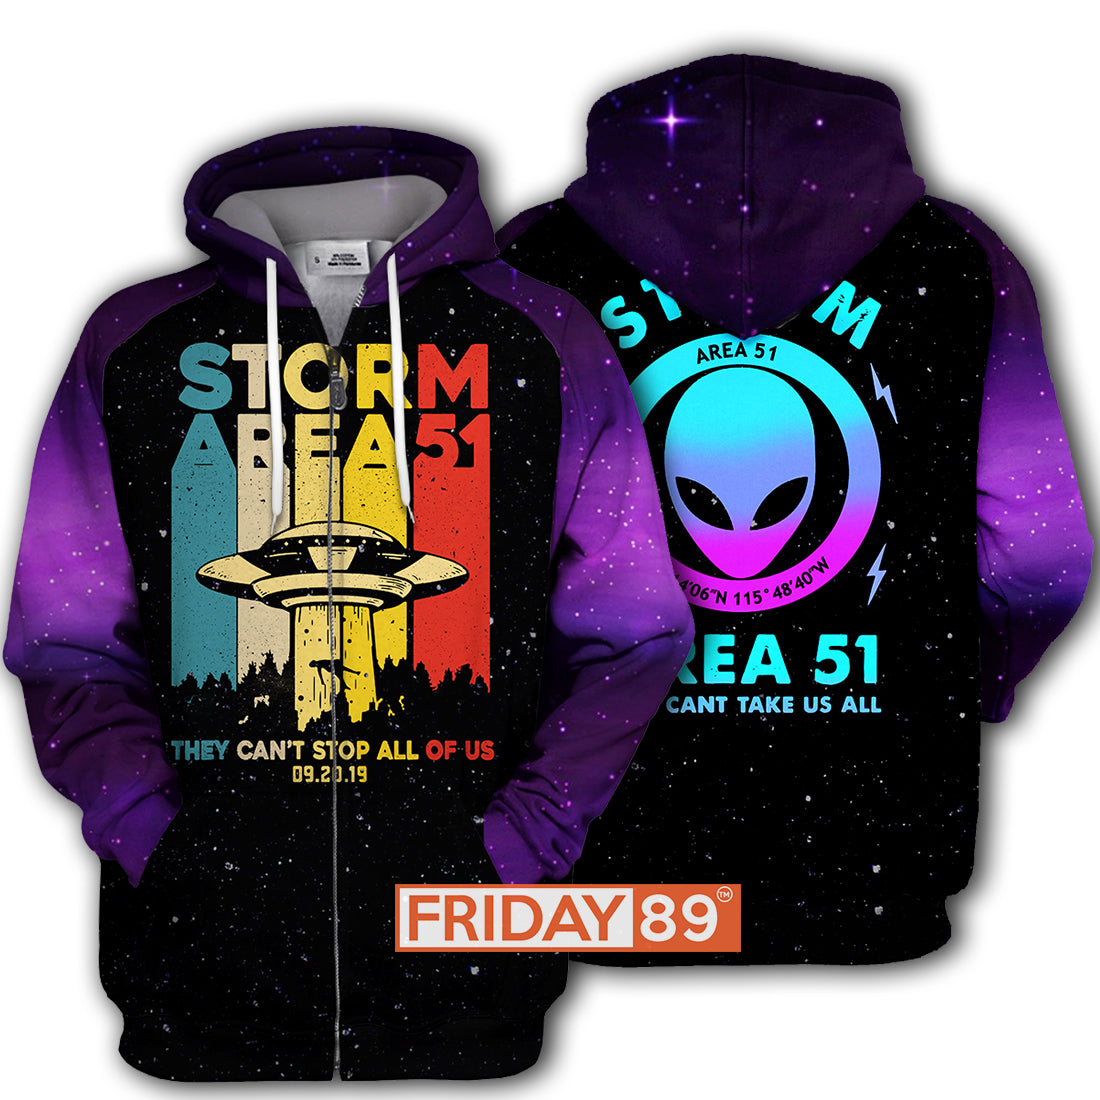 Unifinz Alien Hoodie Storm Area 51 They Can't Stop Us T-shirt High Quality Alien Shirt Sweater Tank 2025